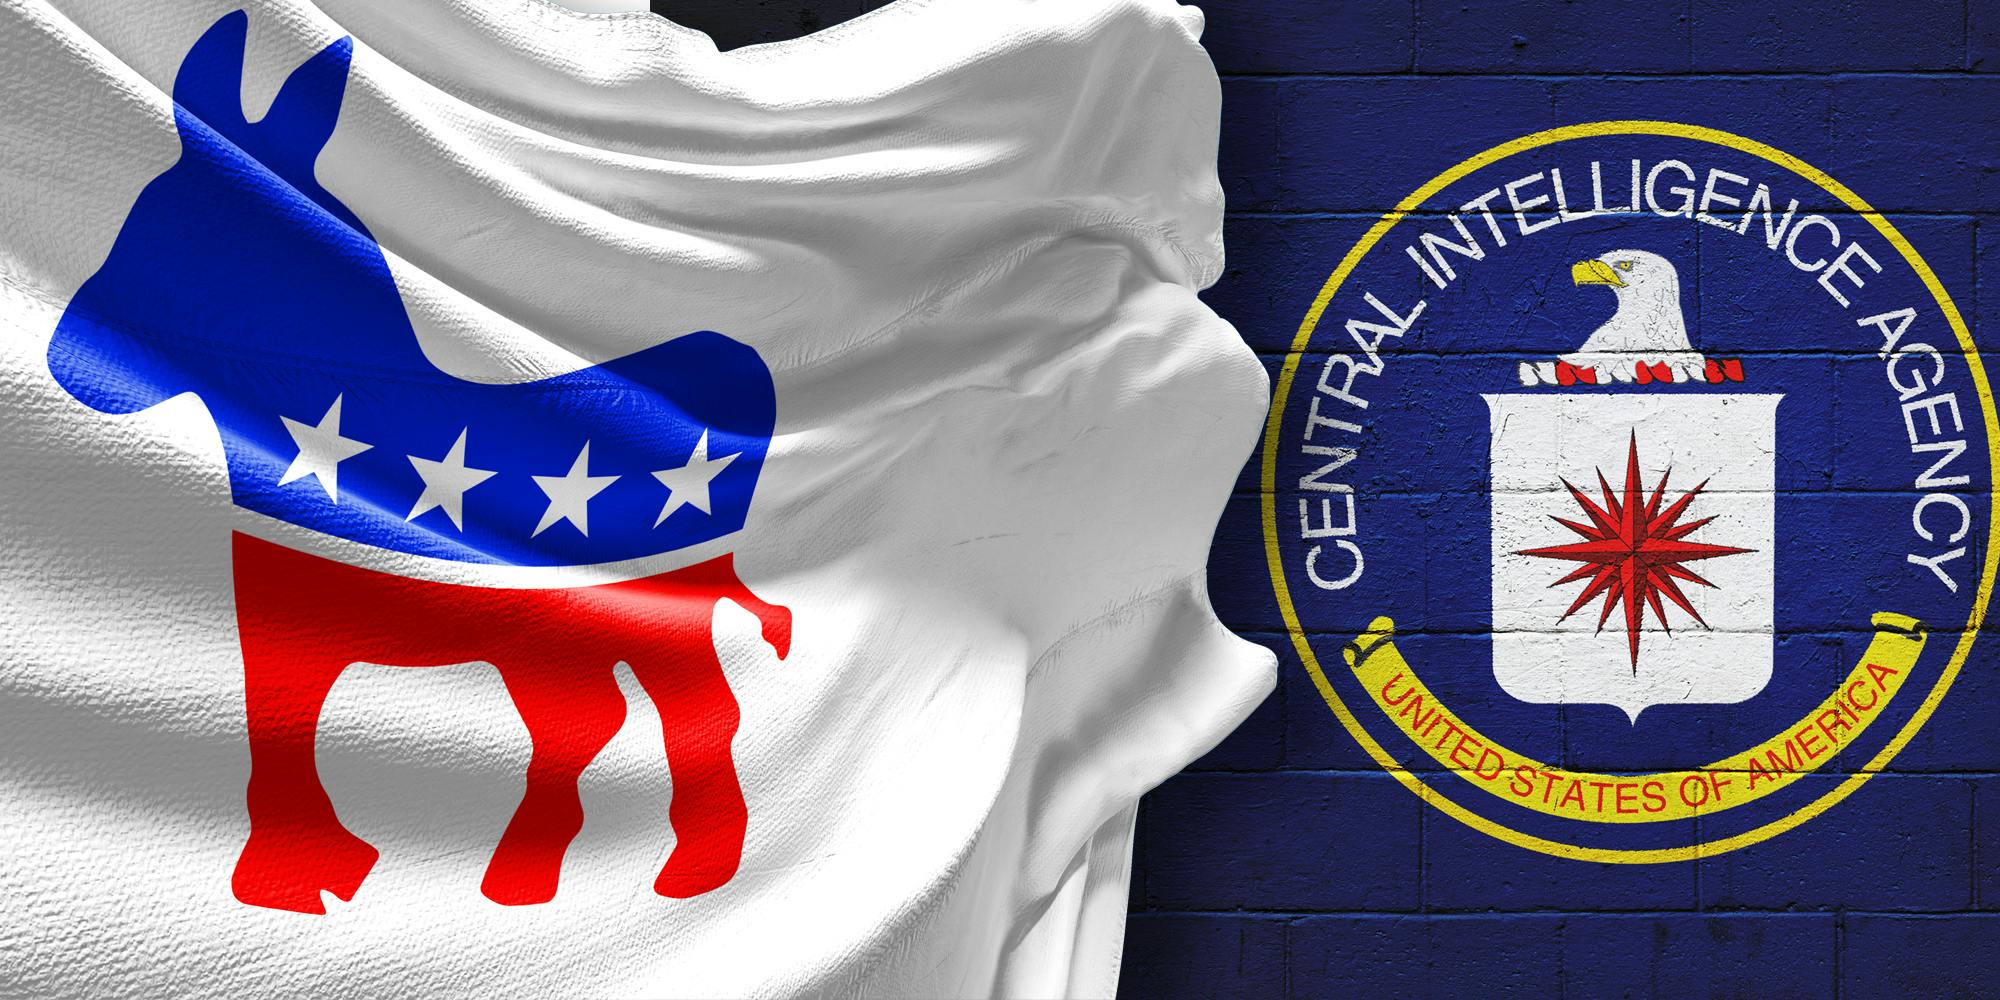 Democratic party logo on flag being blown with CIA logo on brick wall behind it